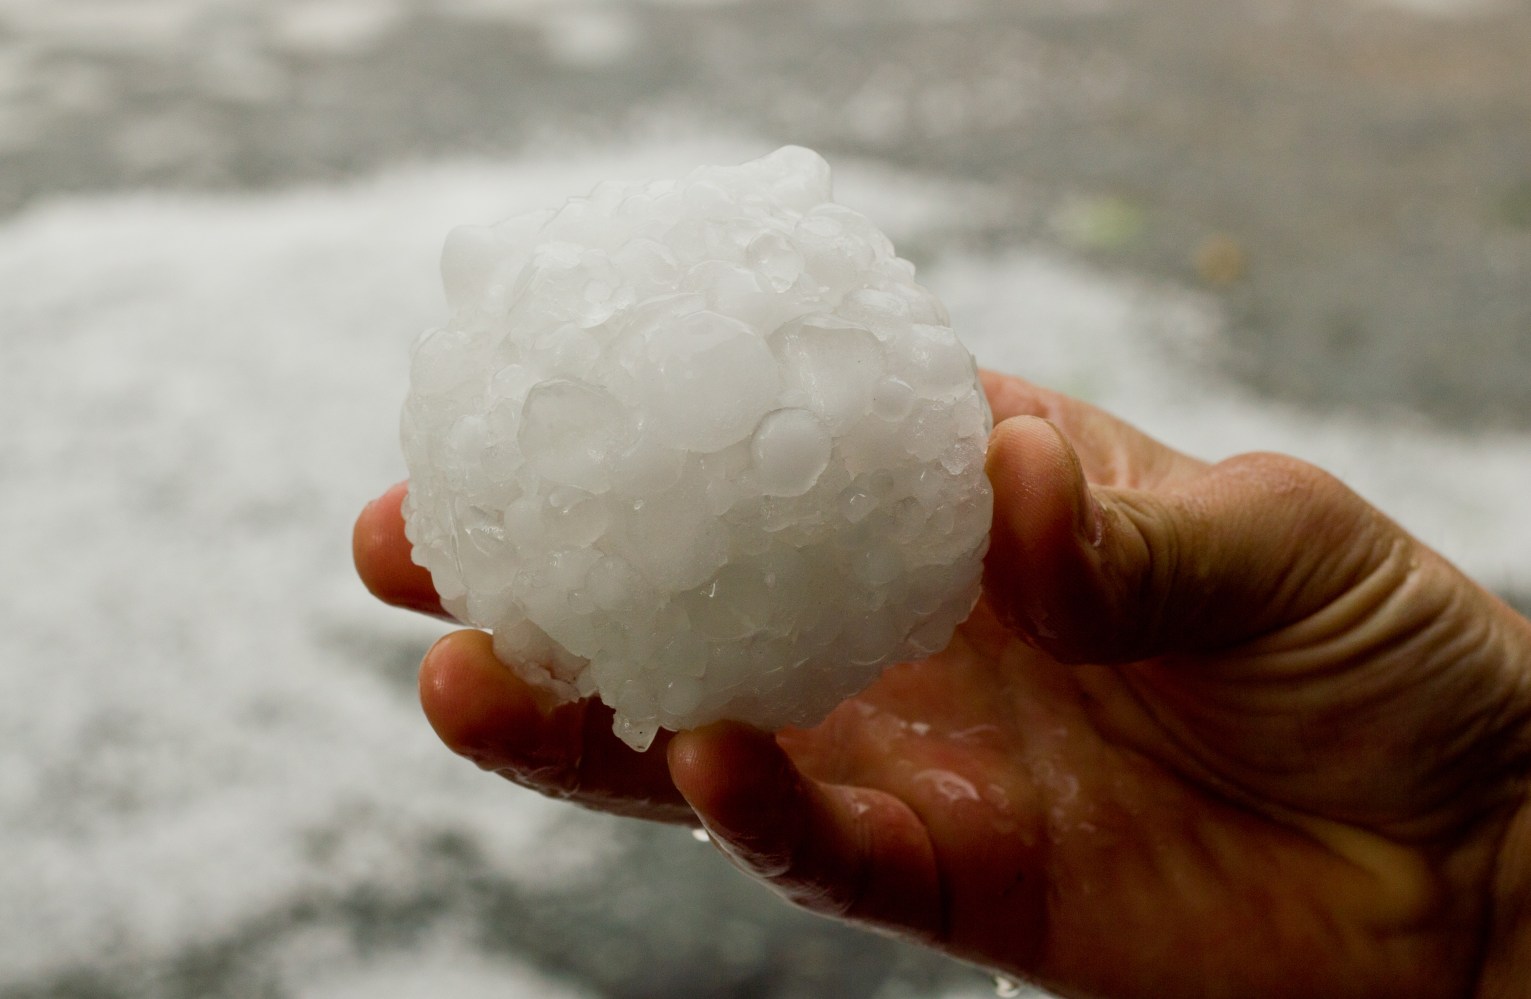 Large sized hailstone in hand